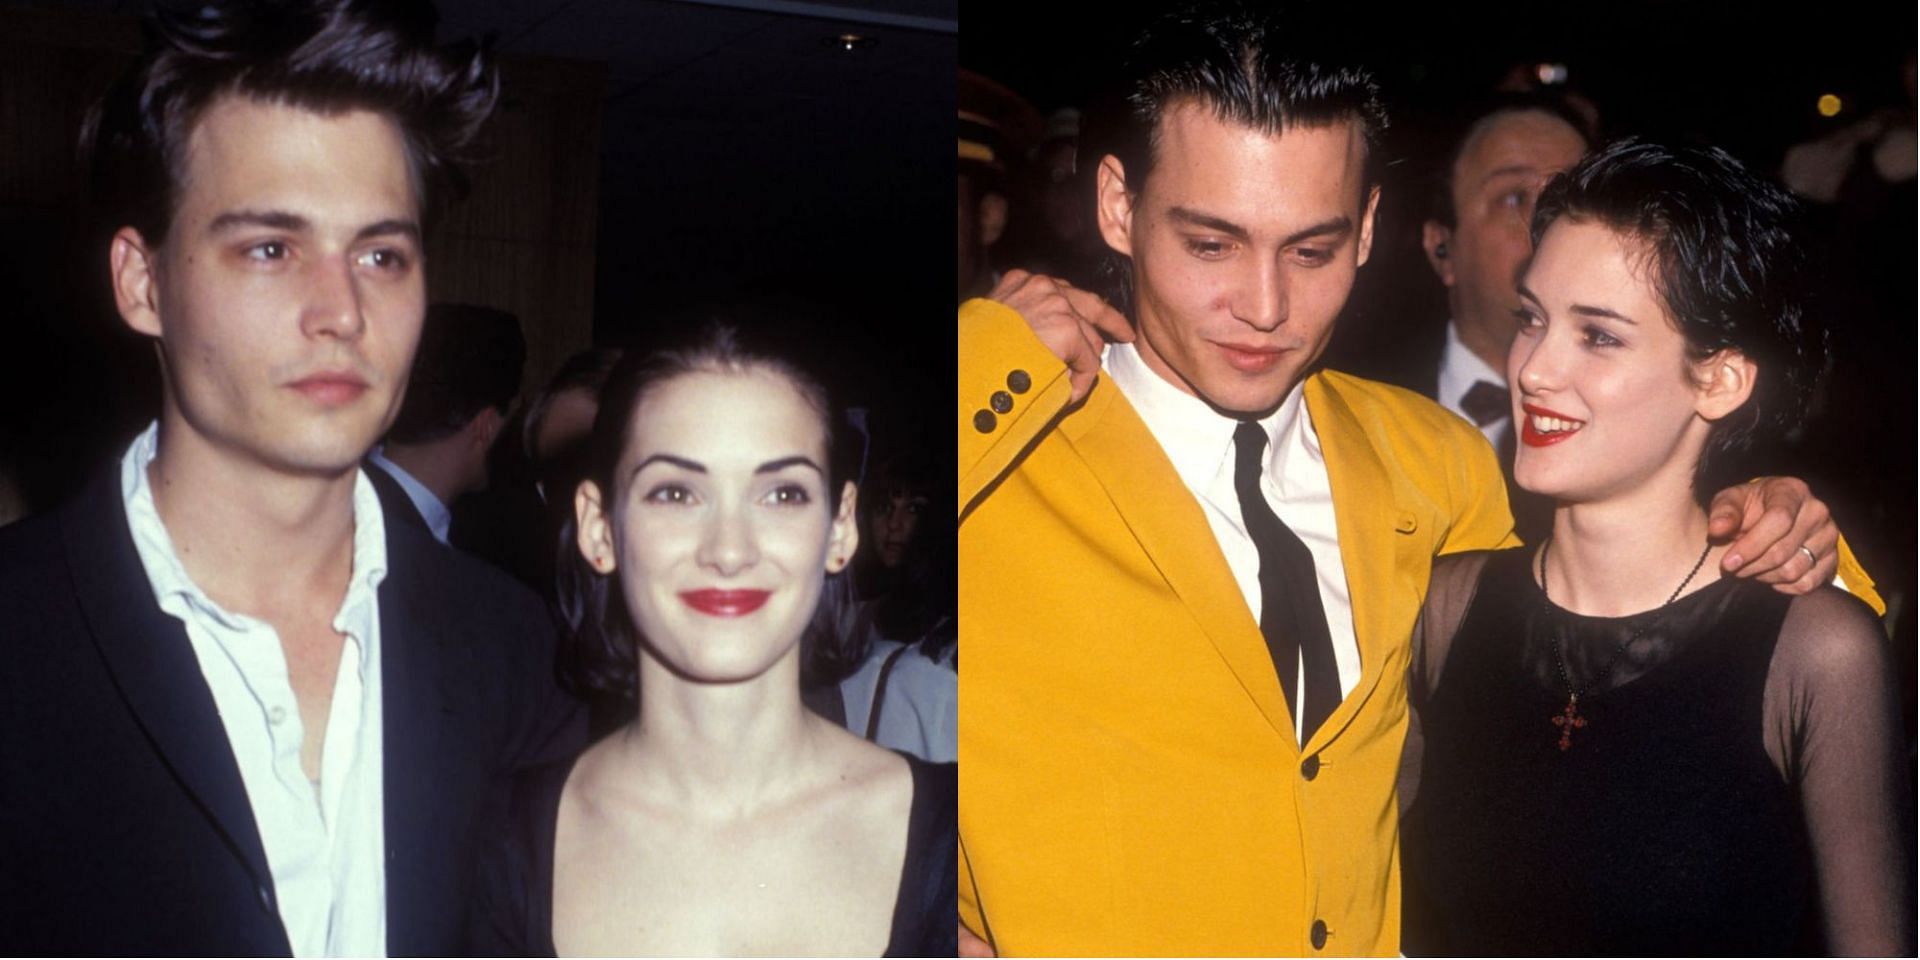 How old was Winona Ryder when she dated Johnny Depp? Stranger Things star opens up on struggling to take care of herself after split